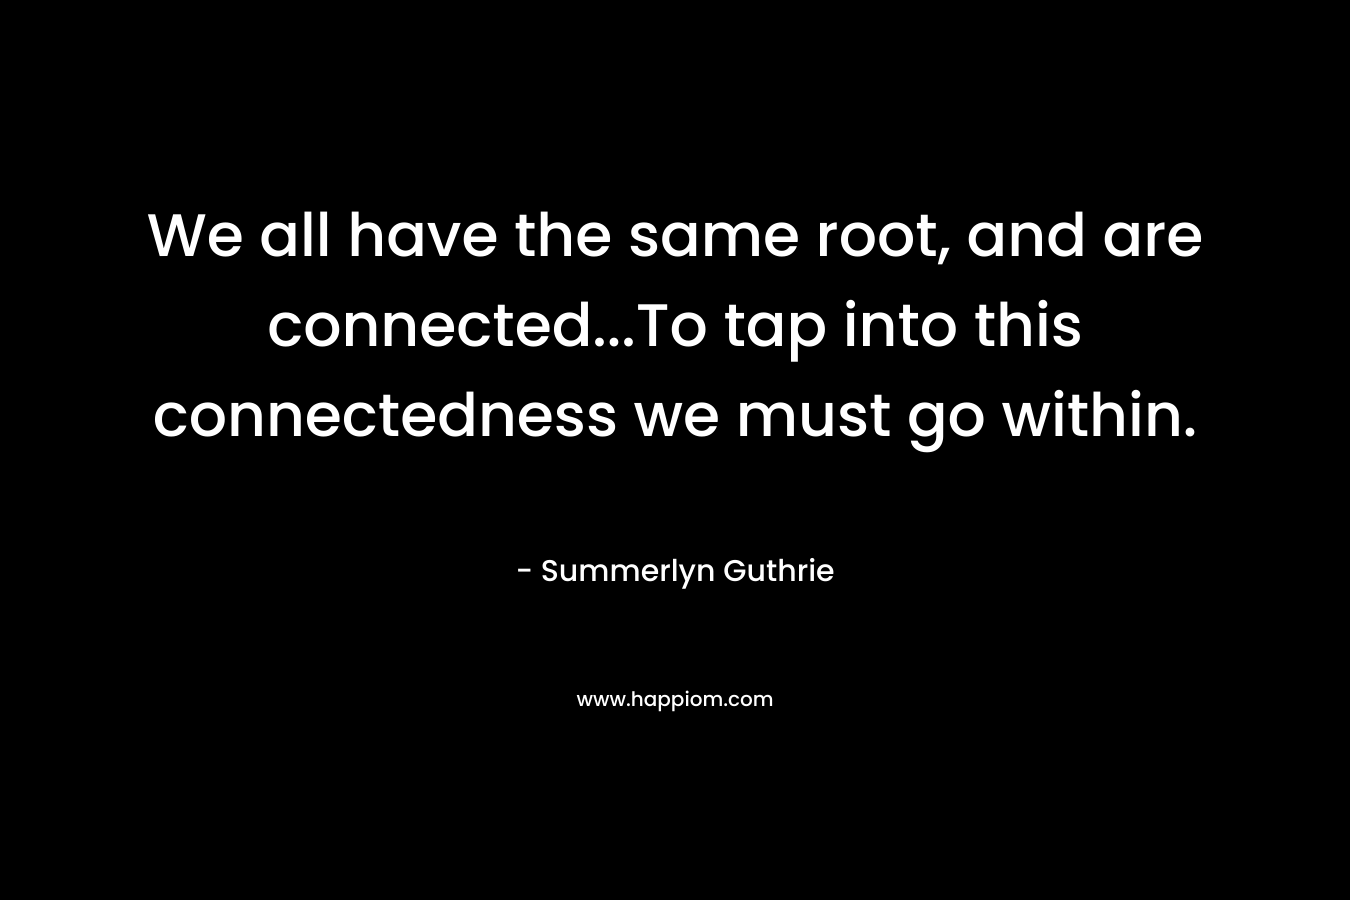 We all have the same root, and are connected...To tap into this connectedness we must go within.